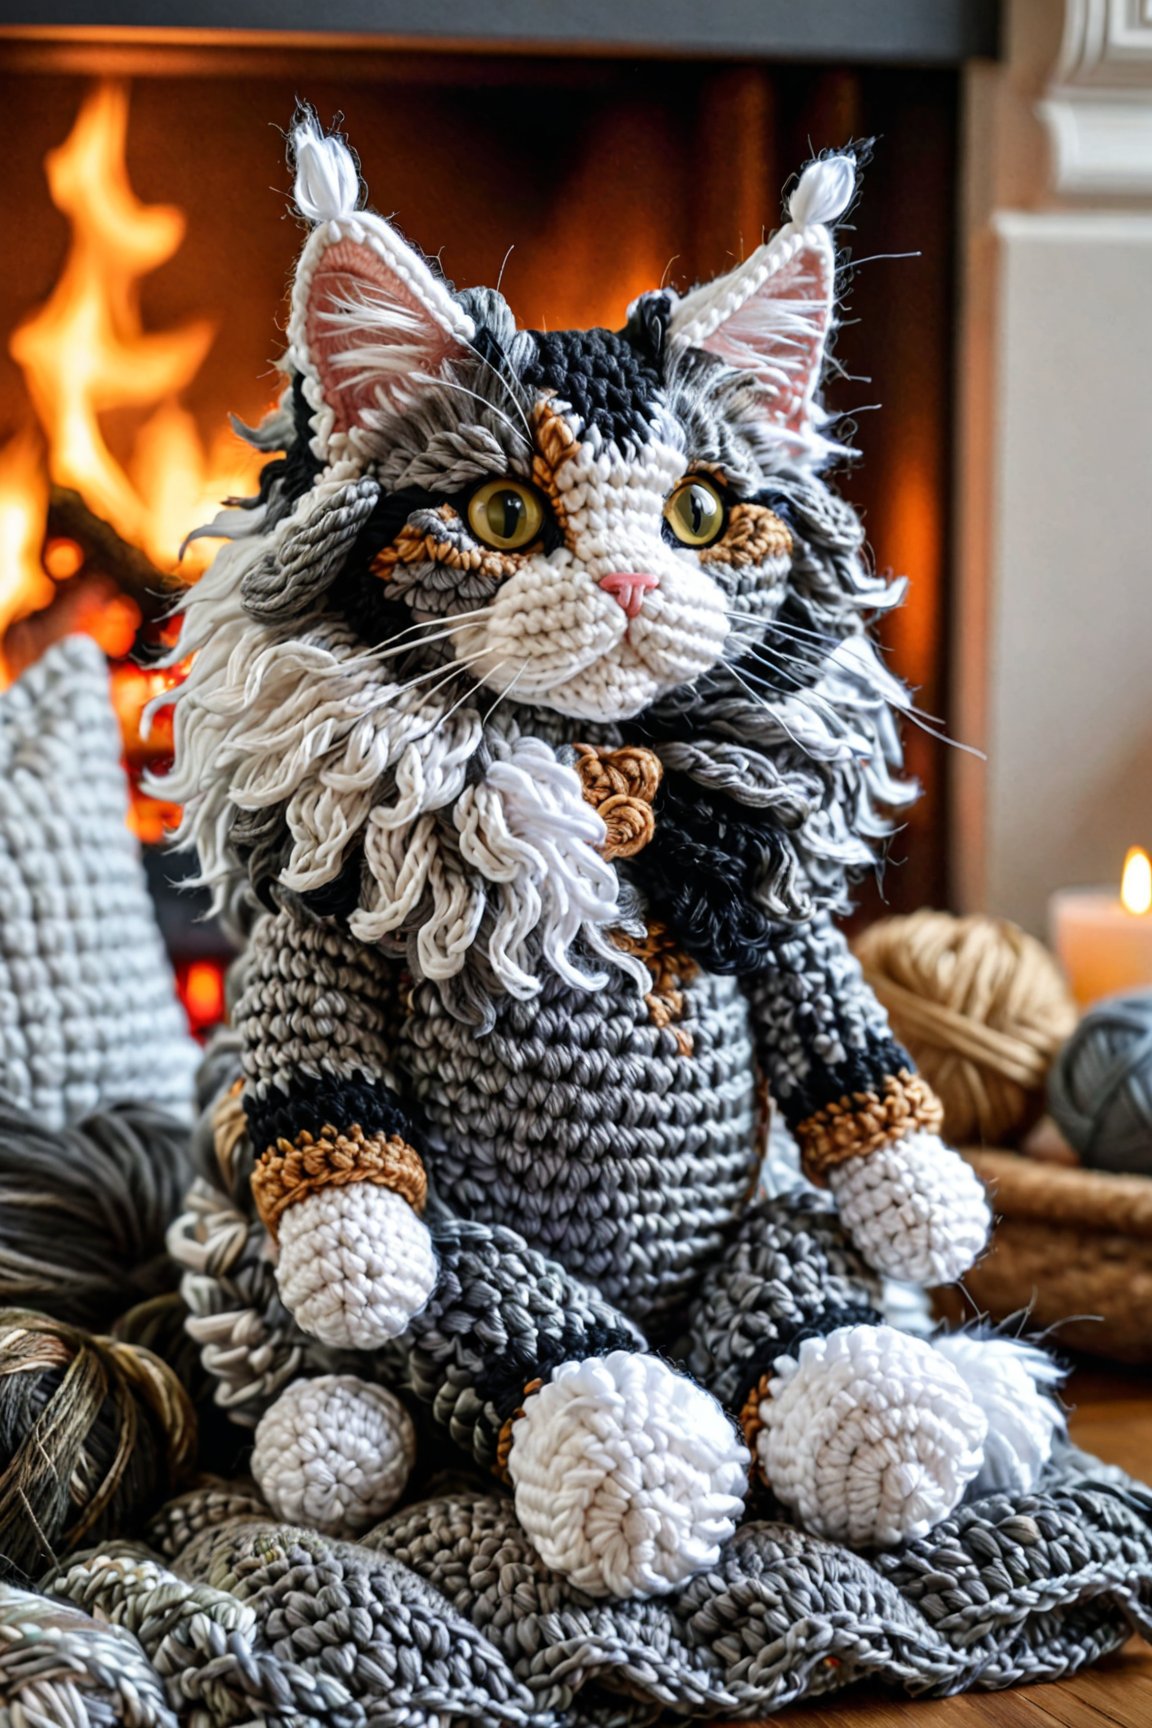 crocheted maine coon toy cat in colors of grey, white, black sitting in front of a fireplace on a puffy pillow. detailed textures, ultra sharp, crocheted